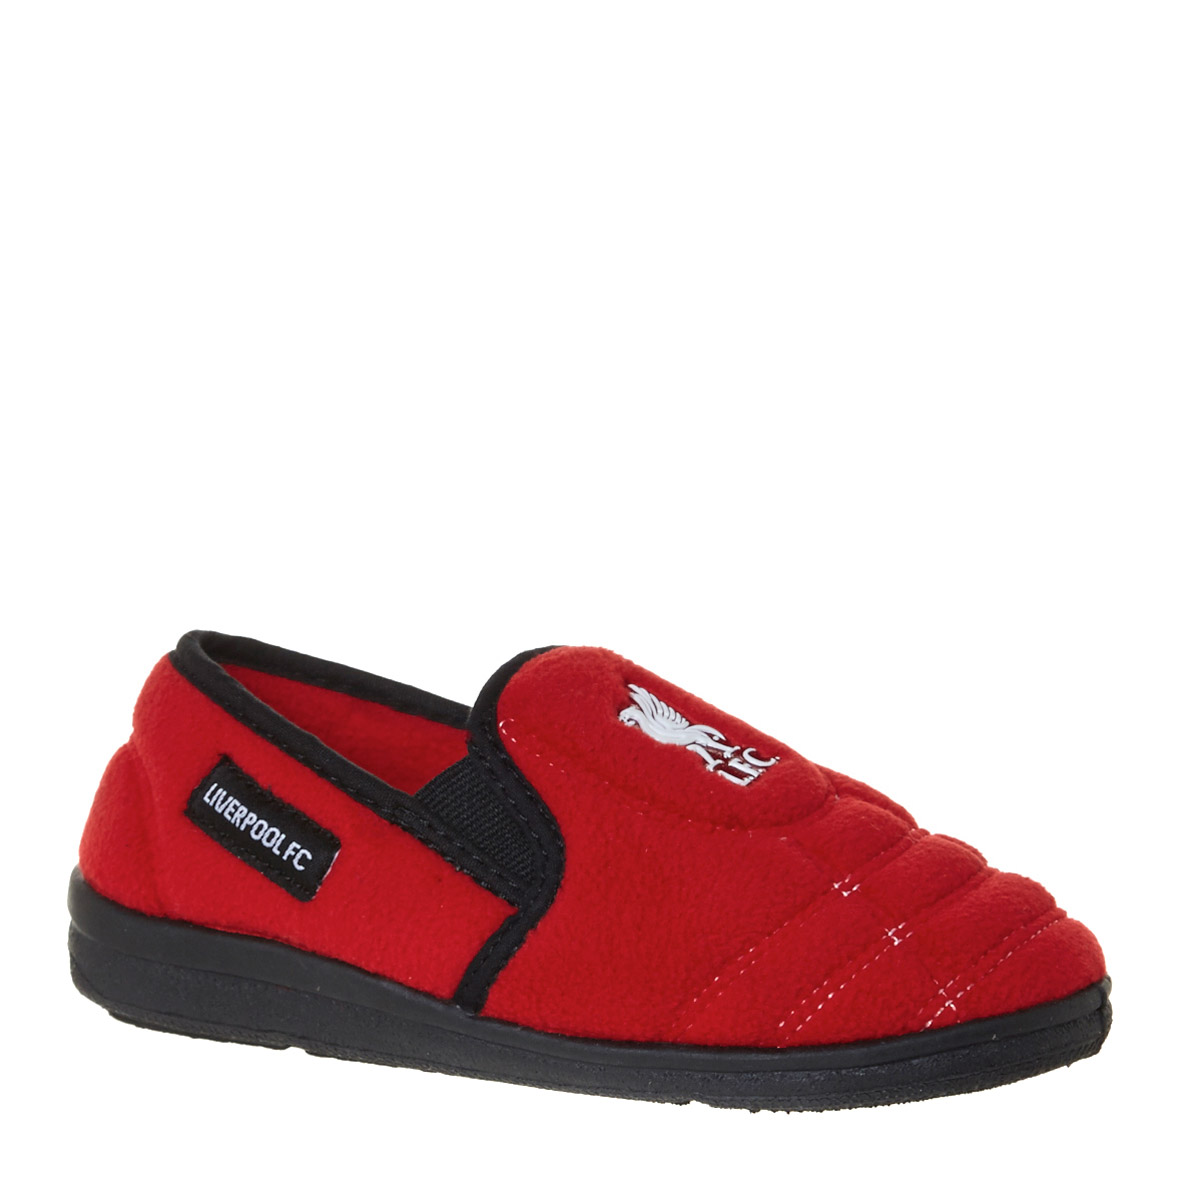 liverpool boys slippers